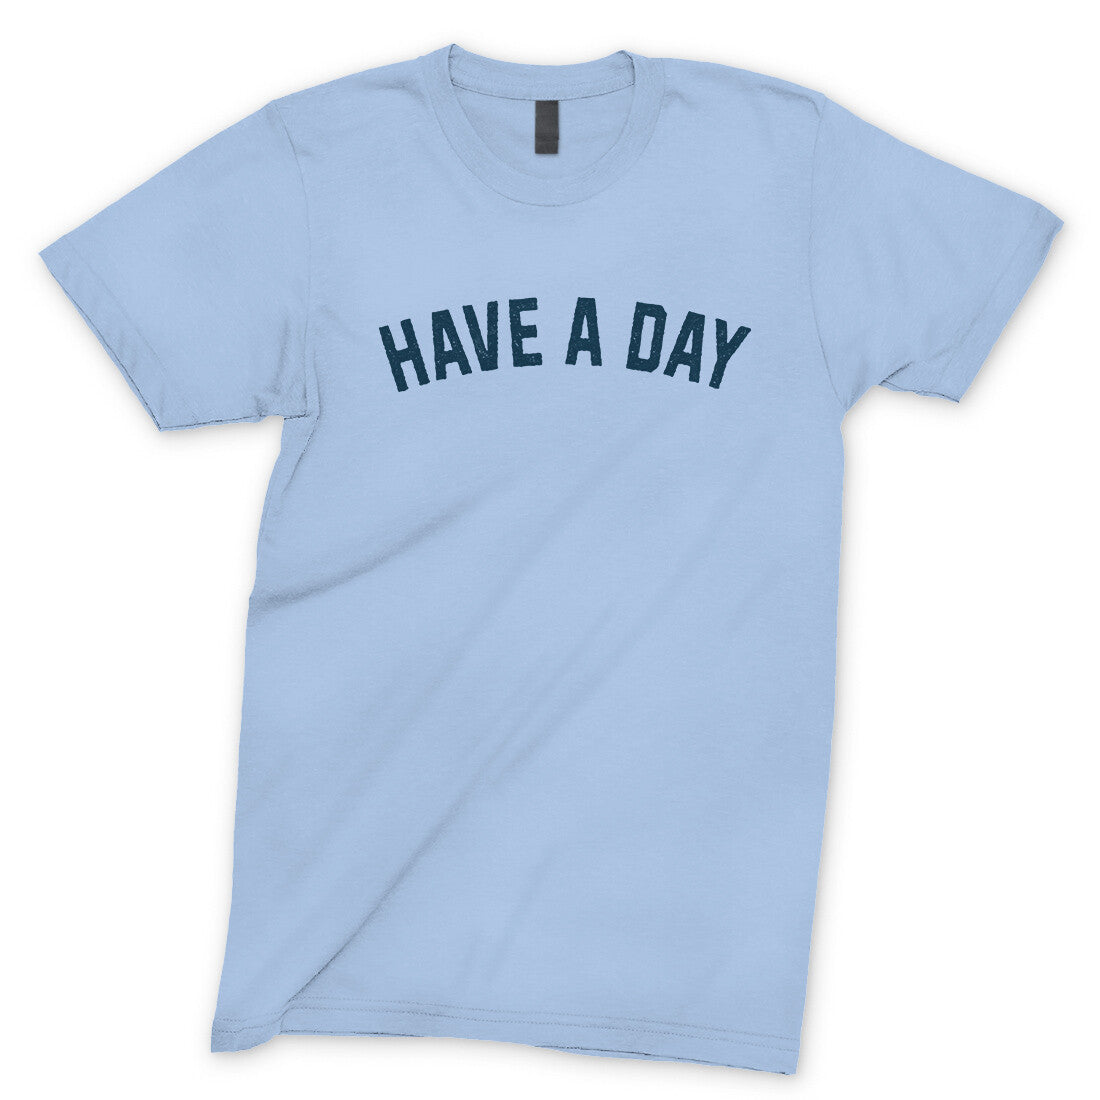 Have a Day in Light Blue Color